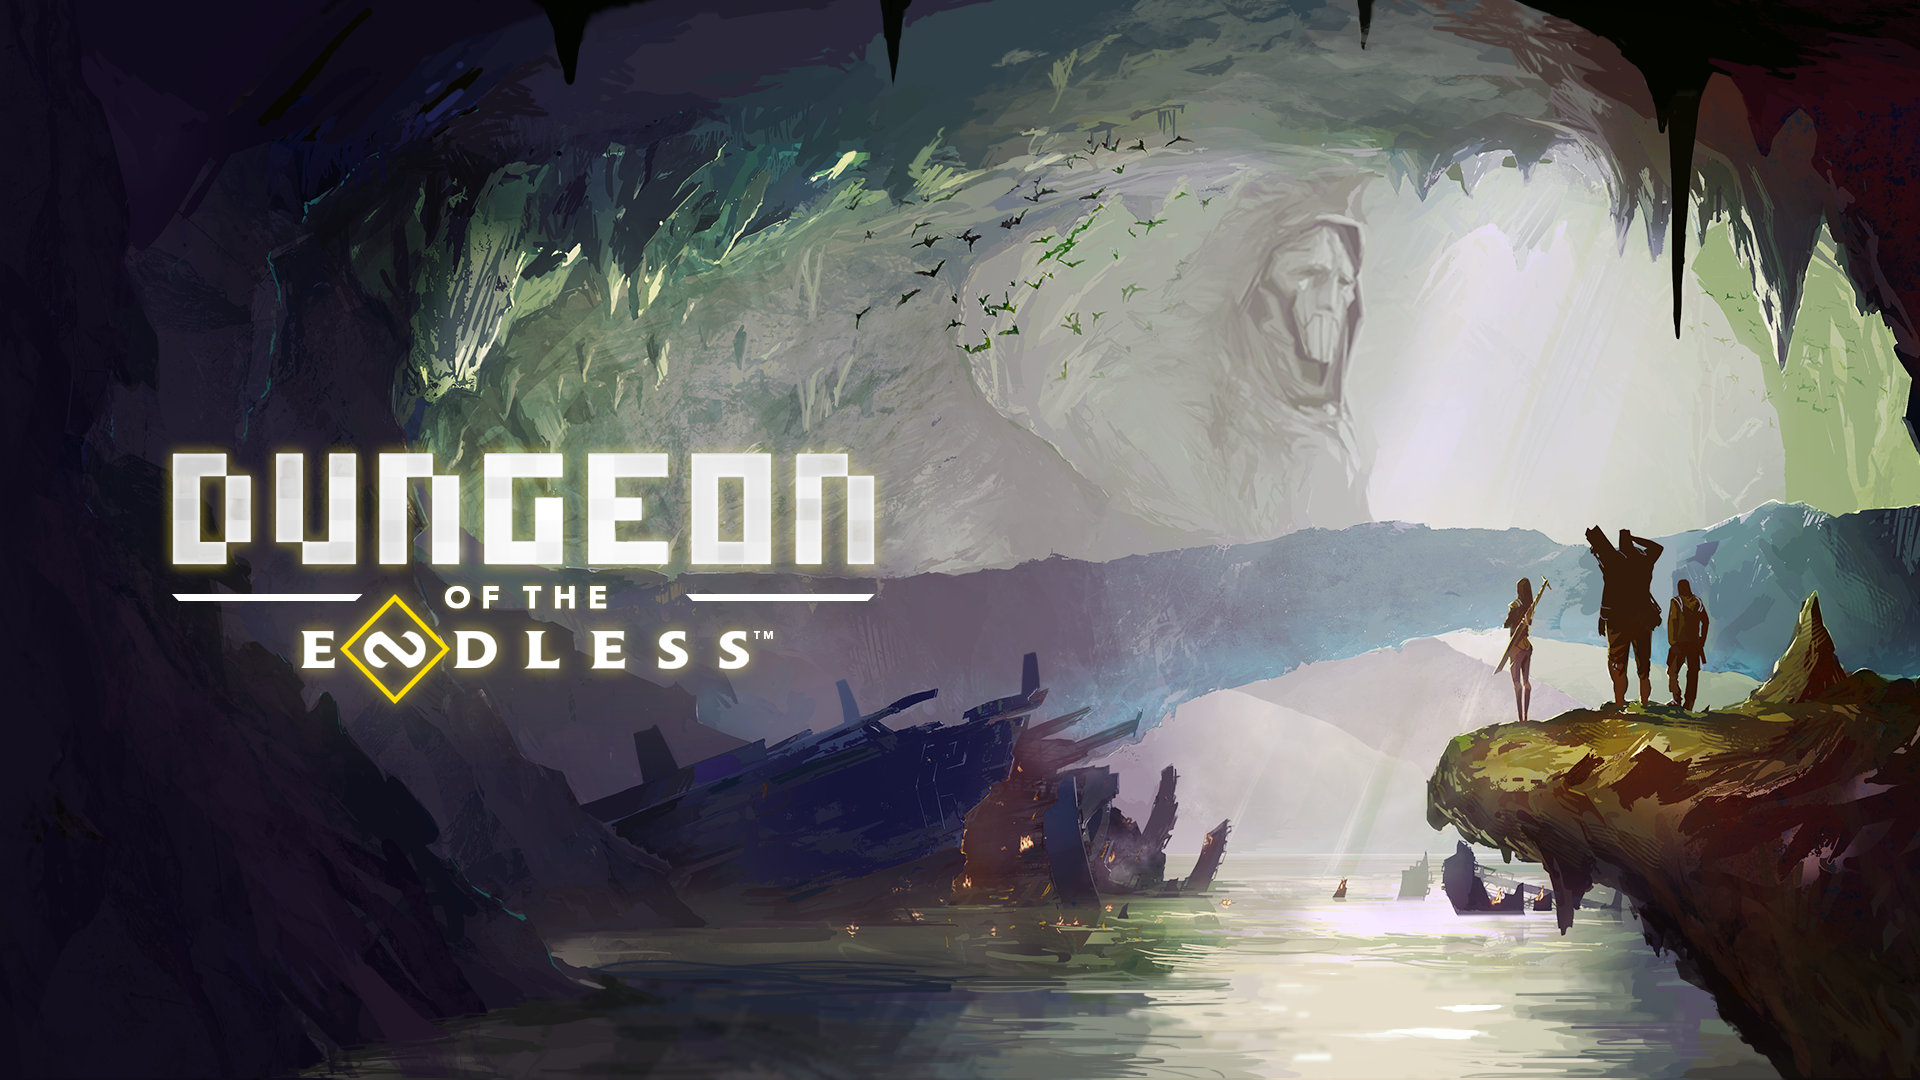 Dungeon of the ENDLESS™!